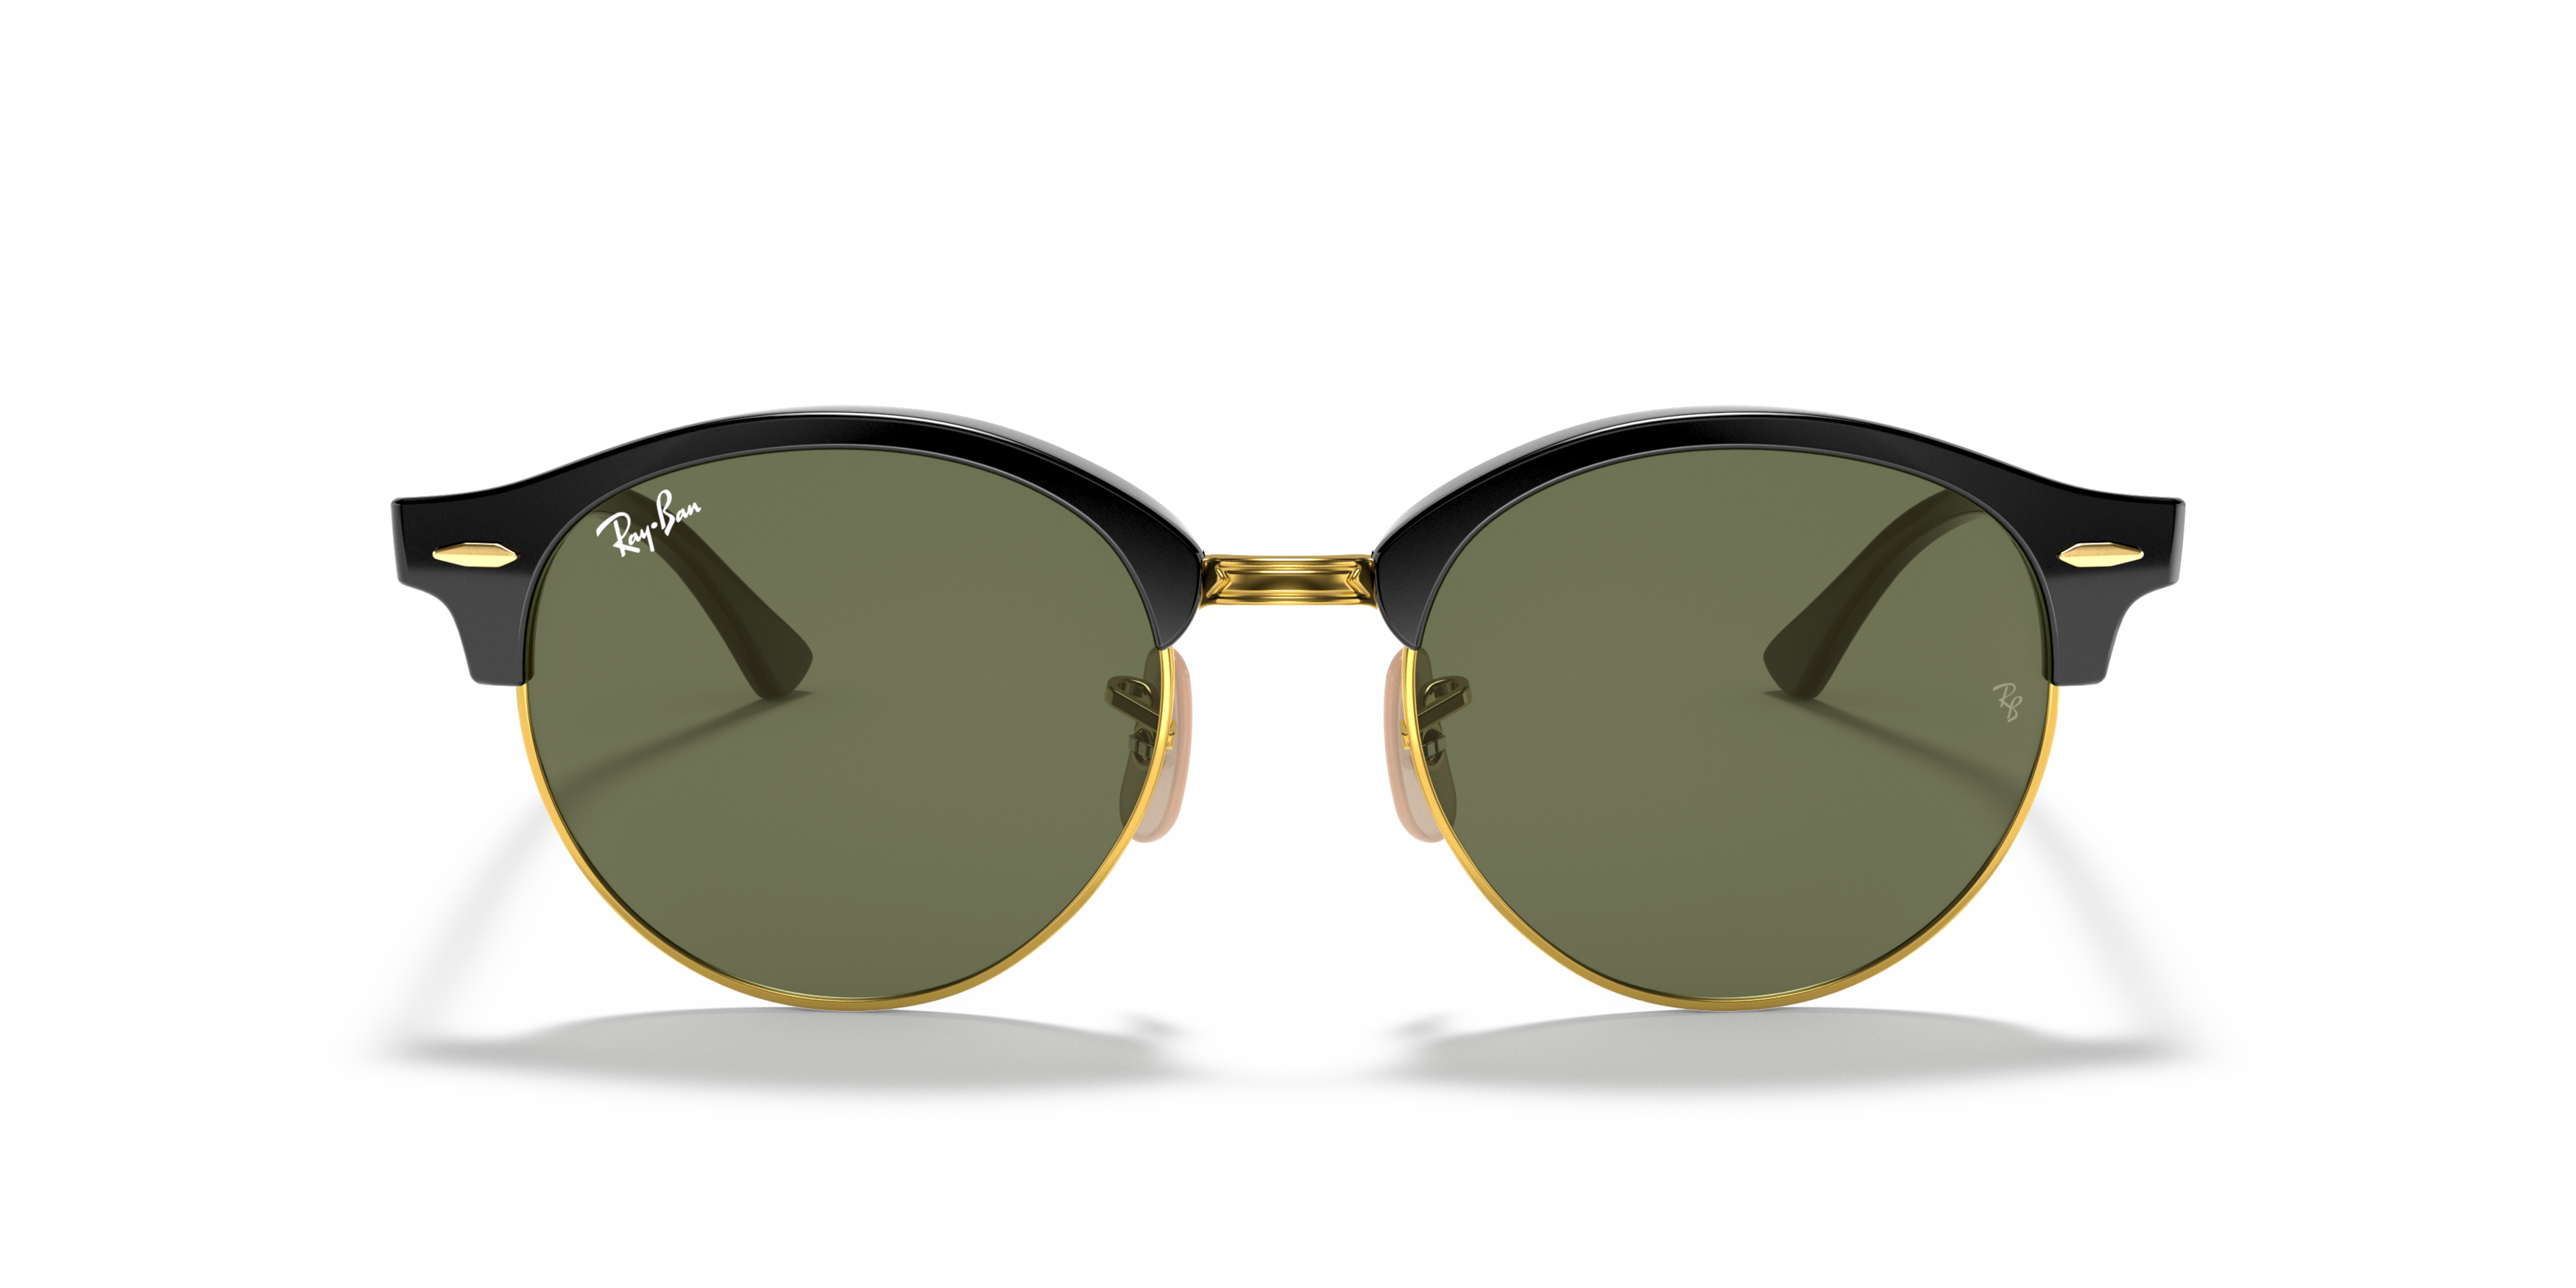 [products.image.front] RAY-BAN RB4246 901